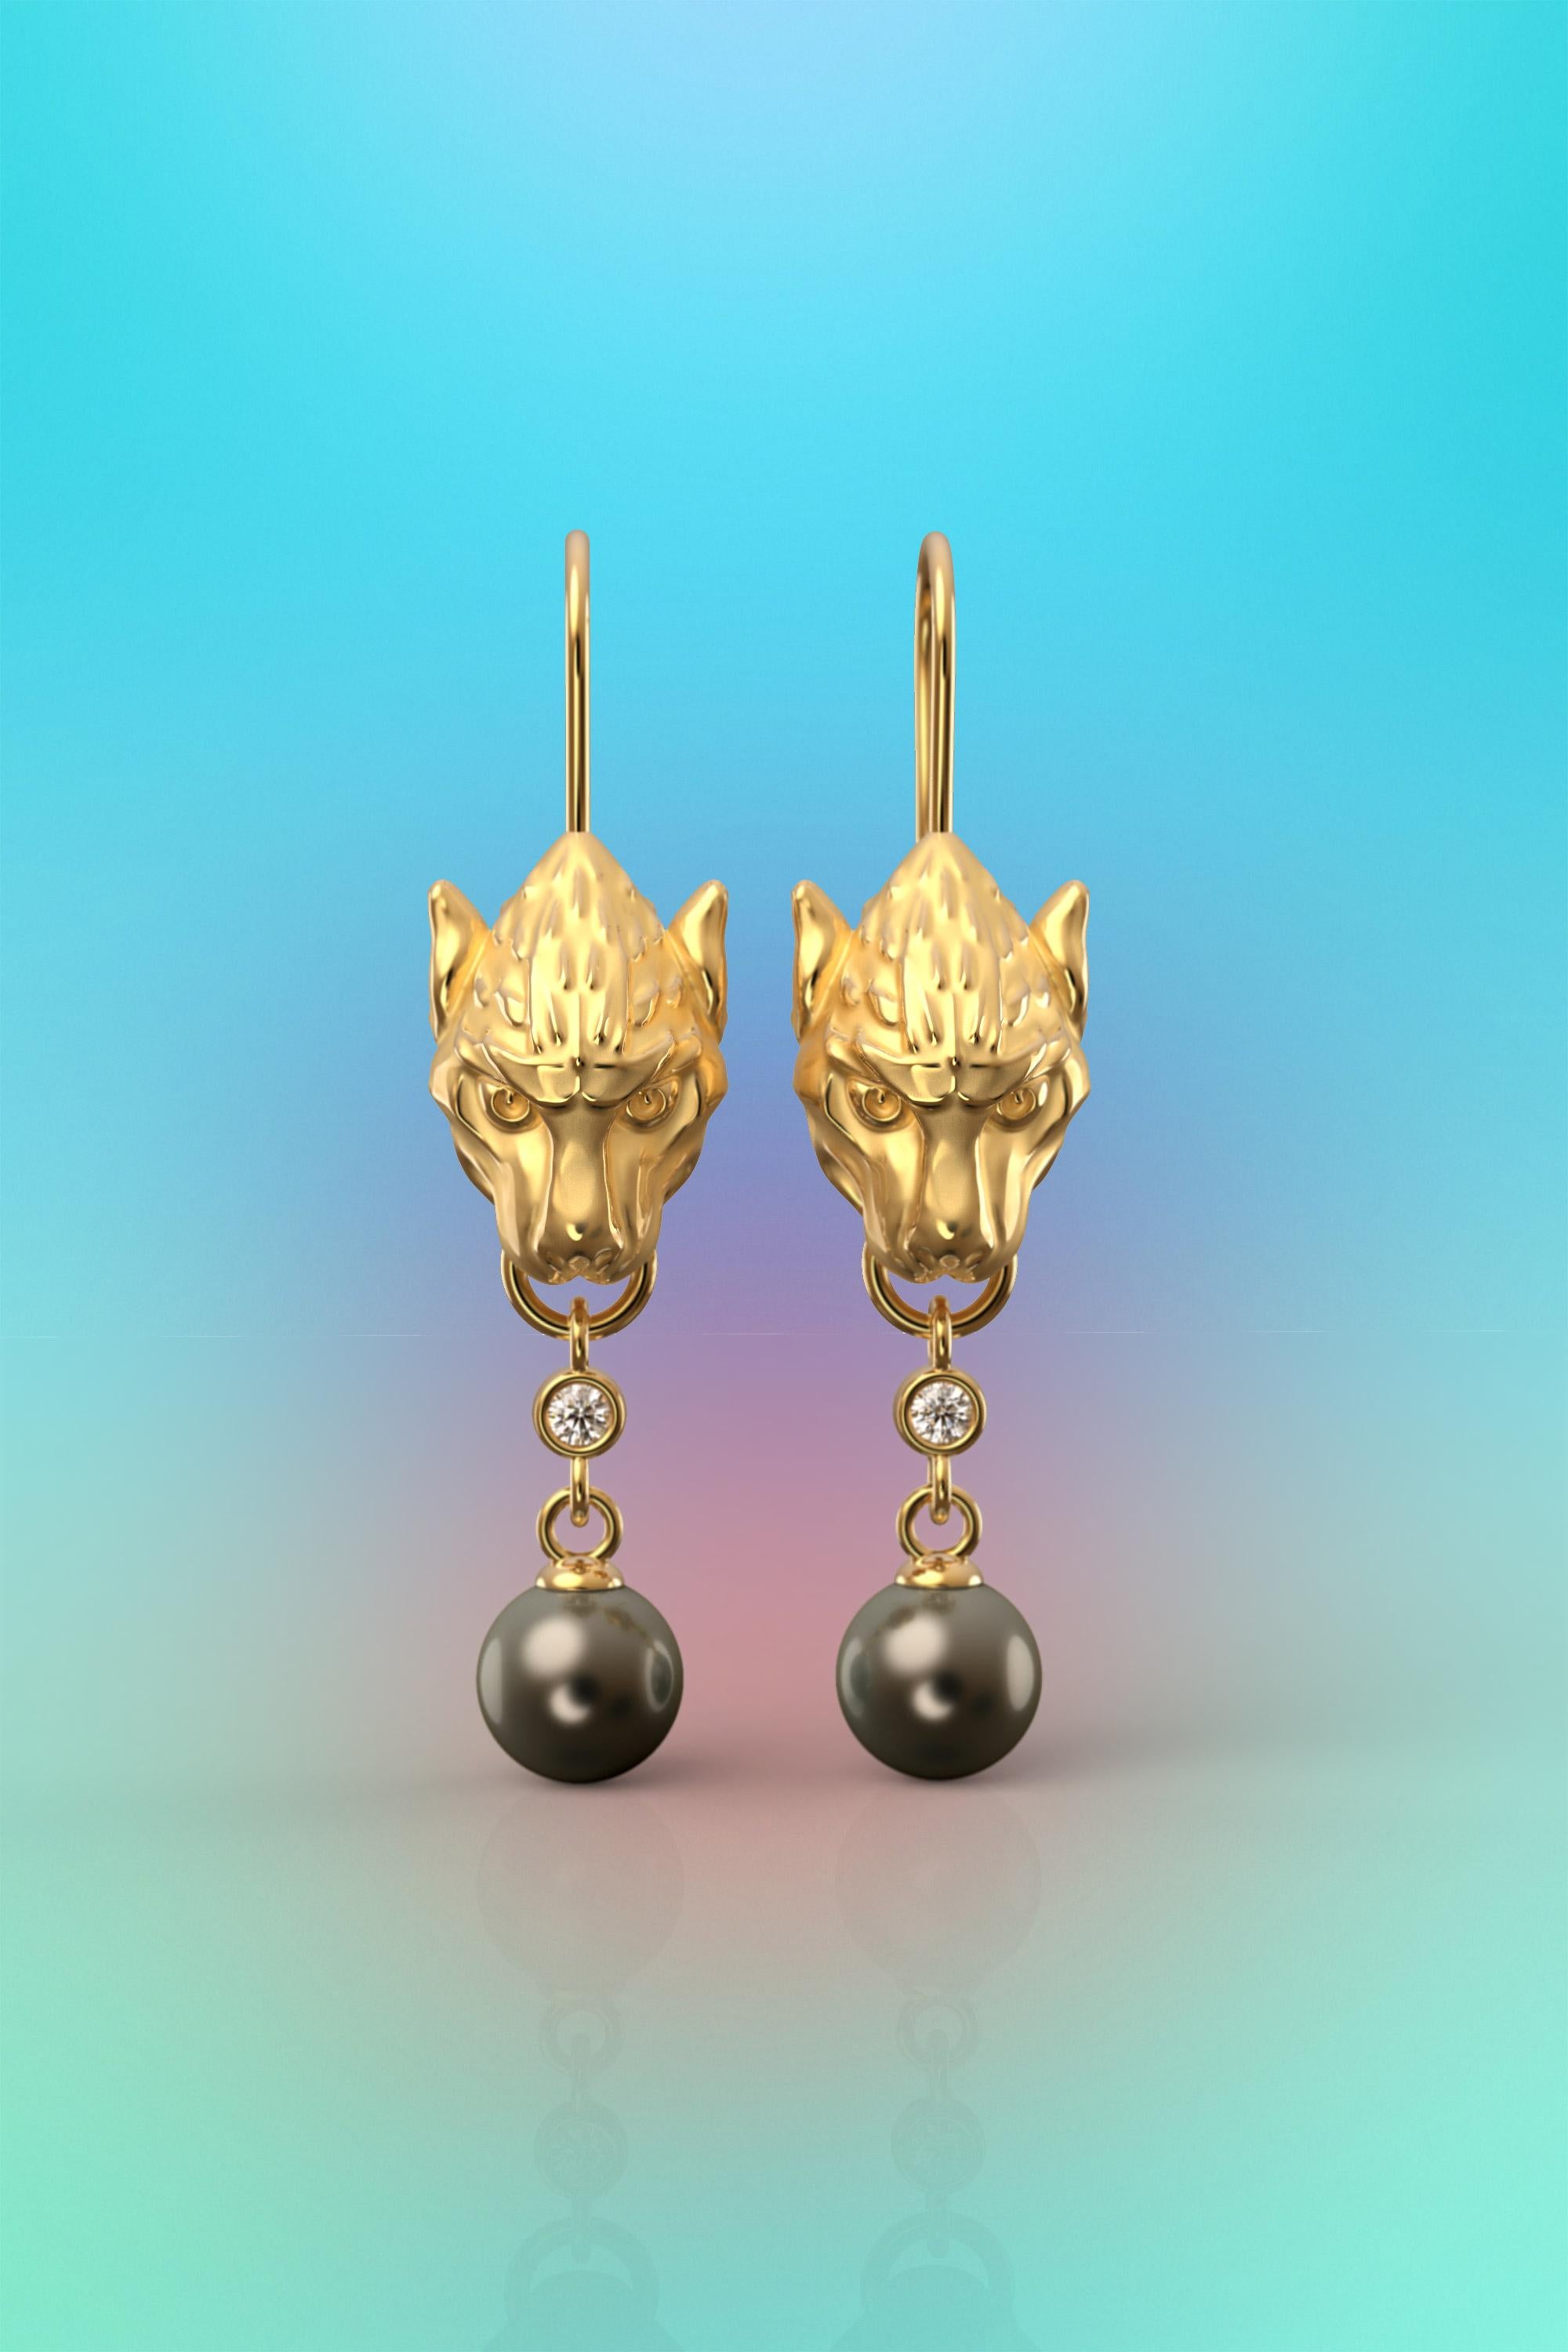 Made to order Sculptural earrings in genuine gold 18k and natural Tahitian Pearls and natural diamonds.
Introducing our exquisite Gothic Gargoyle-inspired Long Dangle Drop Earrings, where elegance meets dark allure. Crafted with meticulous attention